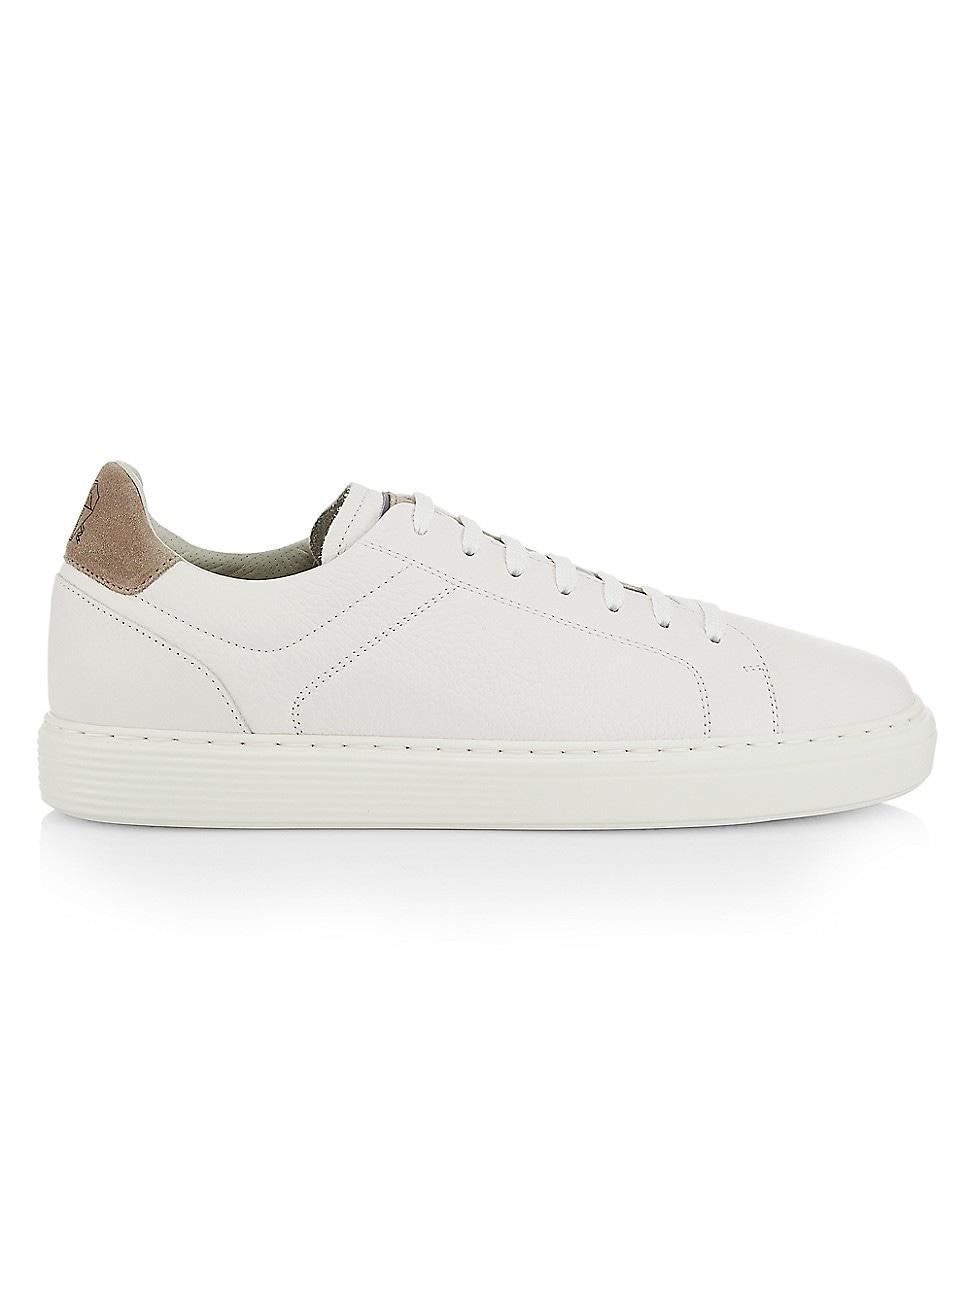 Brunello Cucinelli Grained Leather Sneaker Product Image